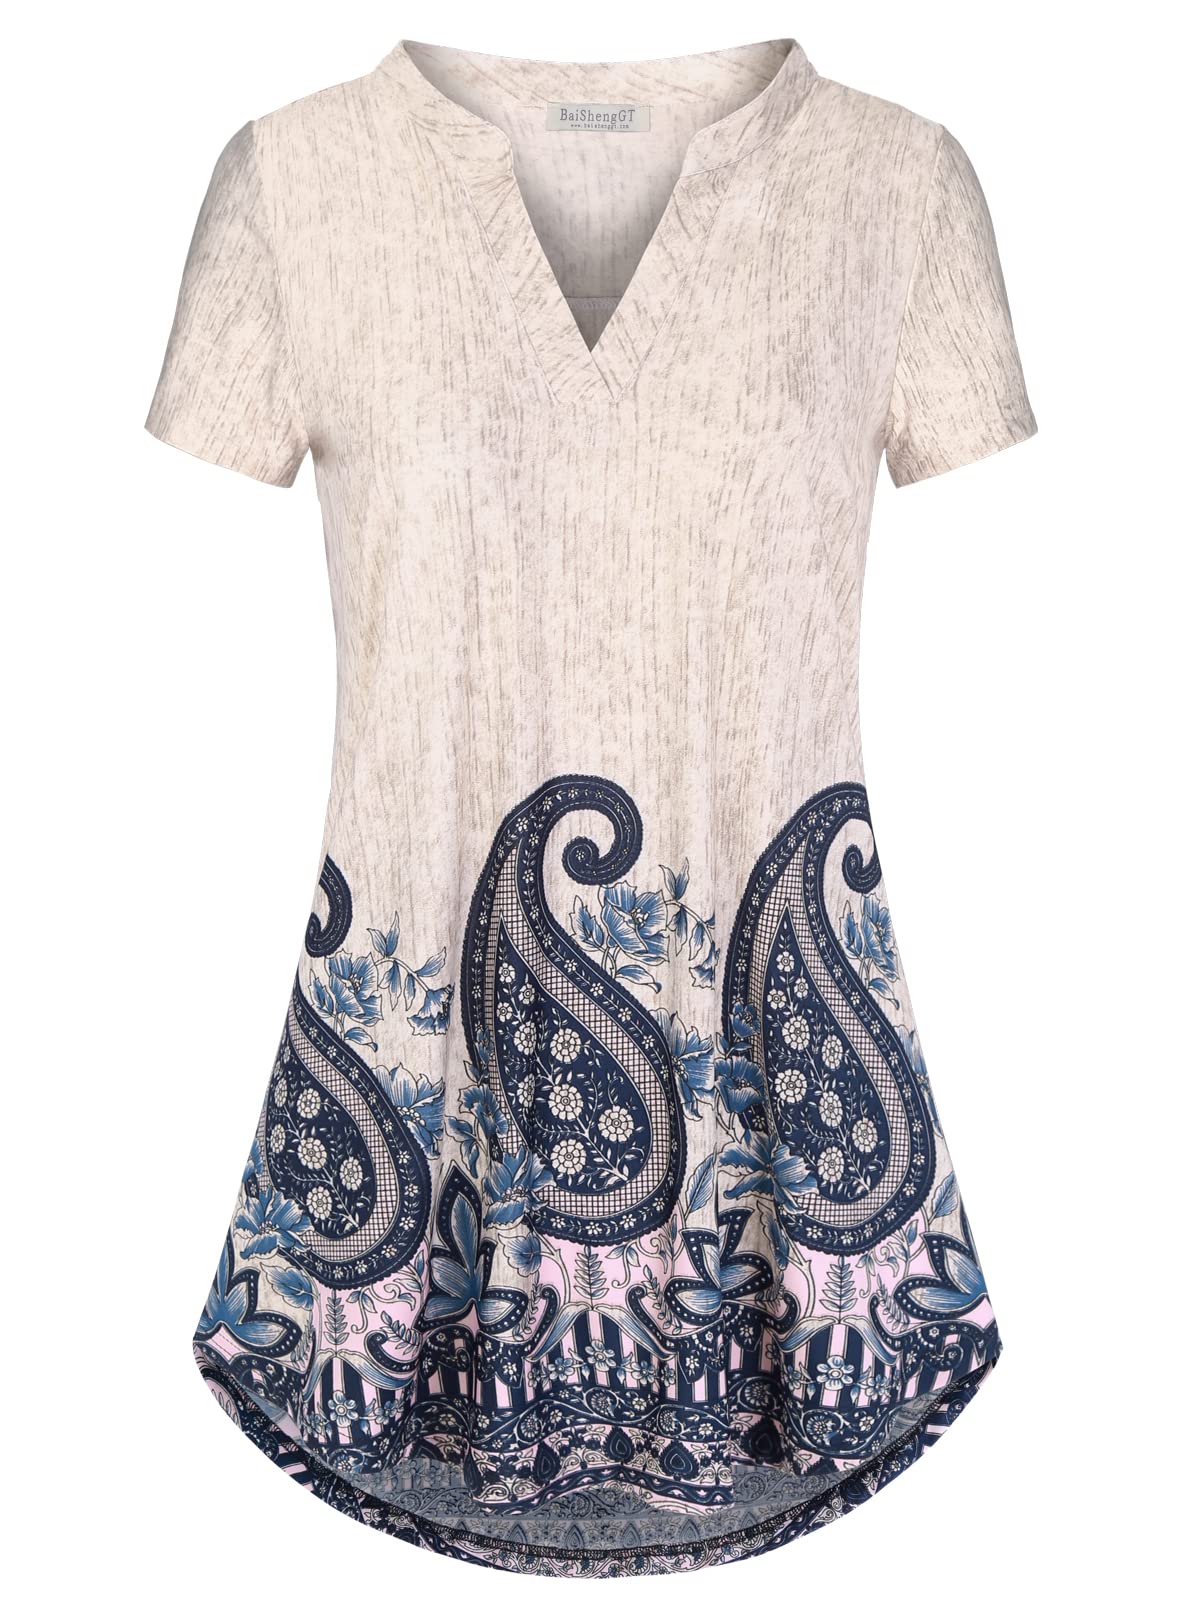 BAISHENGGT Womens Short Sleeve-aprioct Paisley Floral Printed Notch V Neck Blouses Tunics Tops